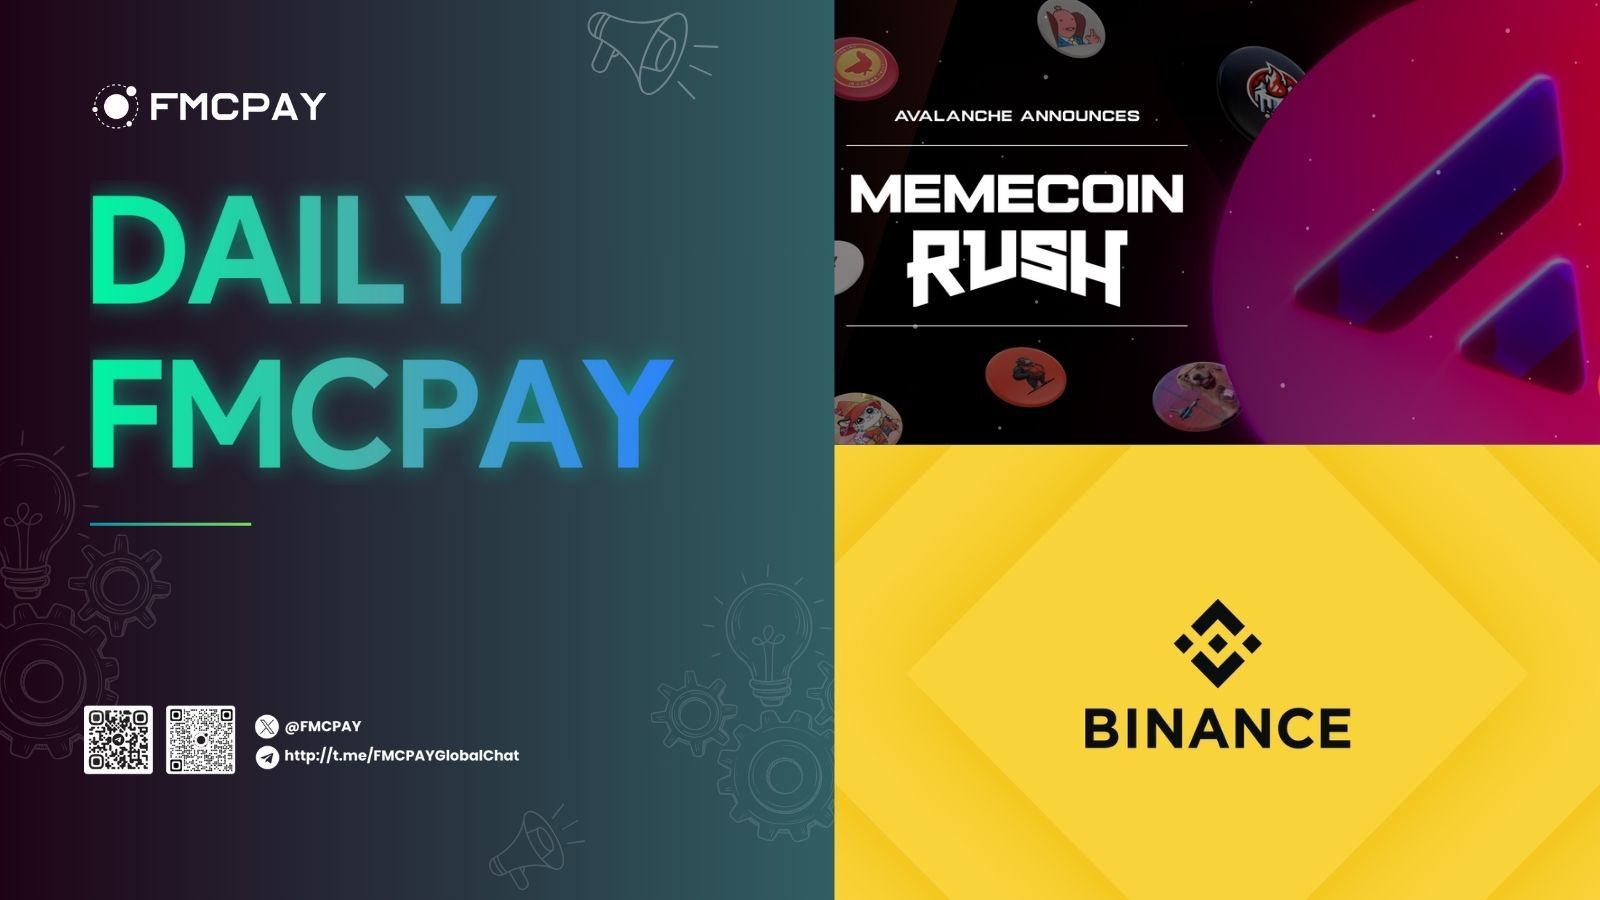 fmcpay avalanche foundation launches memecoin rush injecting 1m into ecosystem